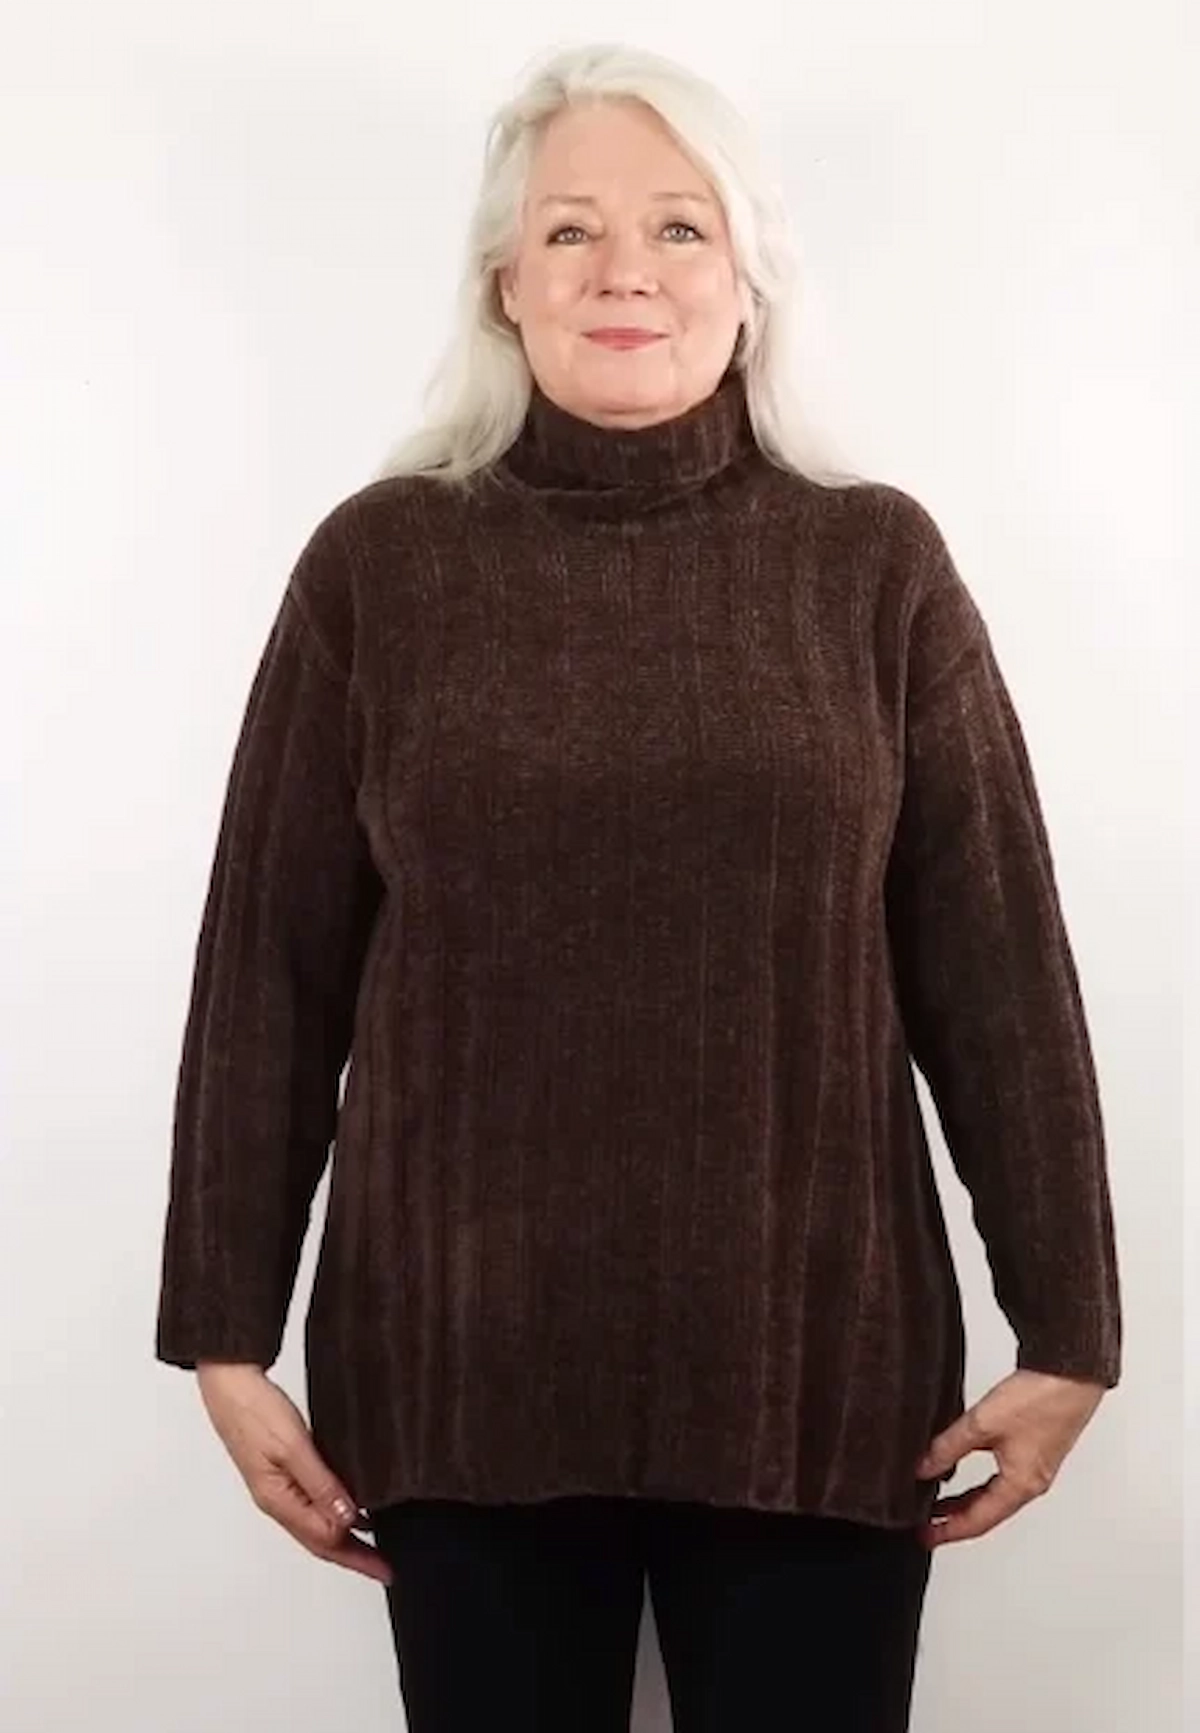 bulky-sweaters-youtube-awesome-over-50